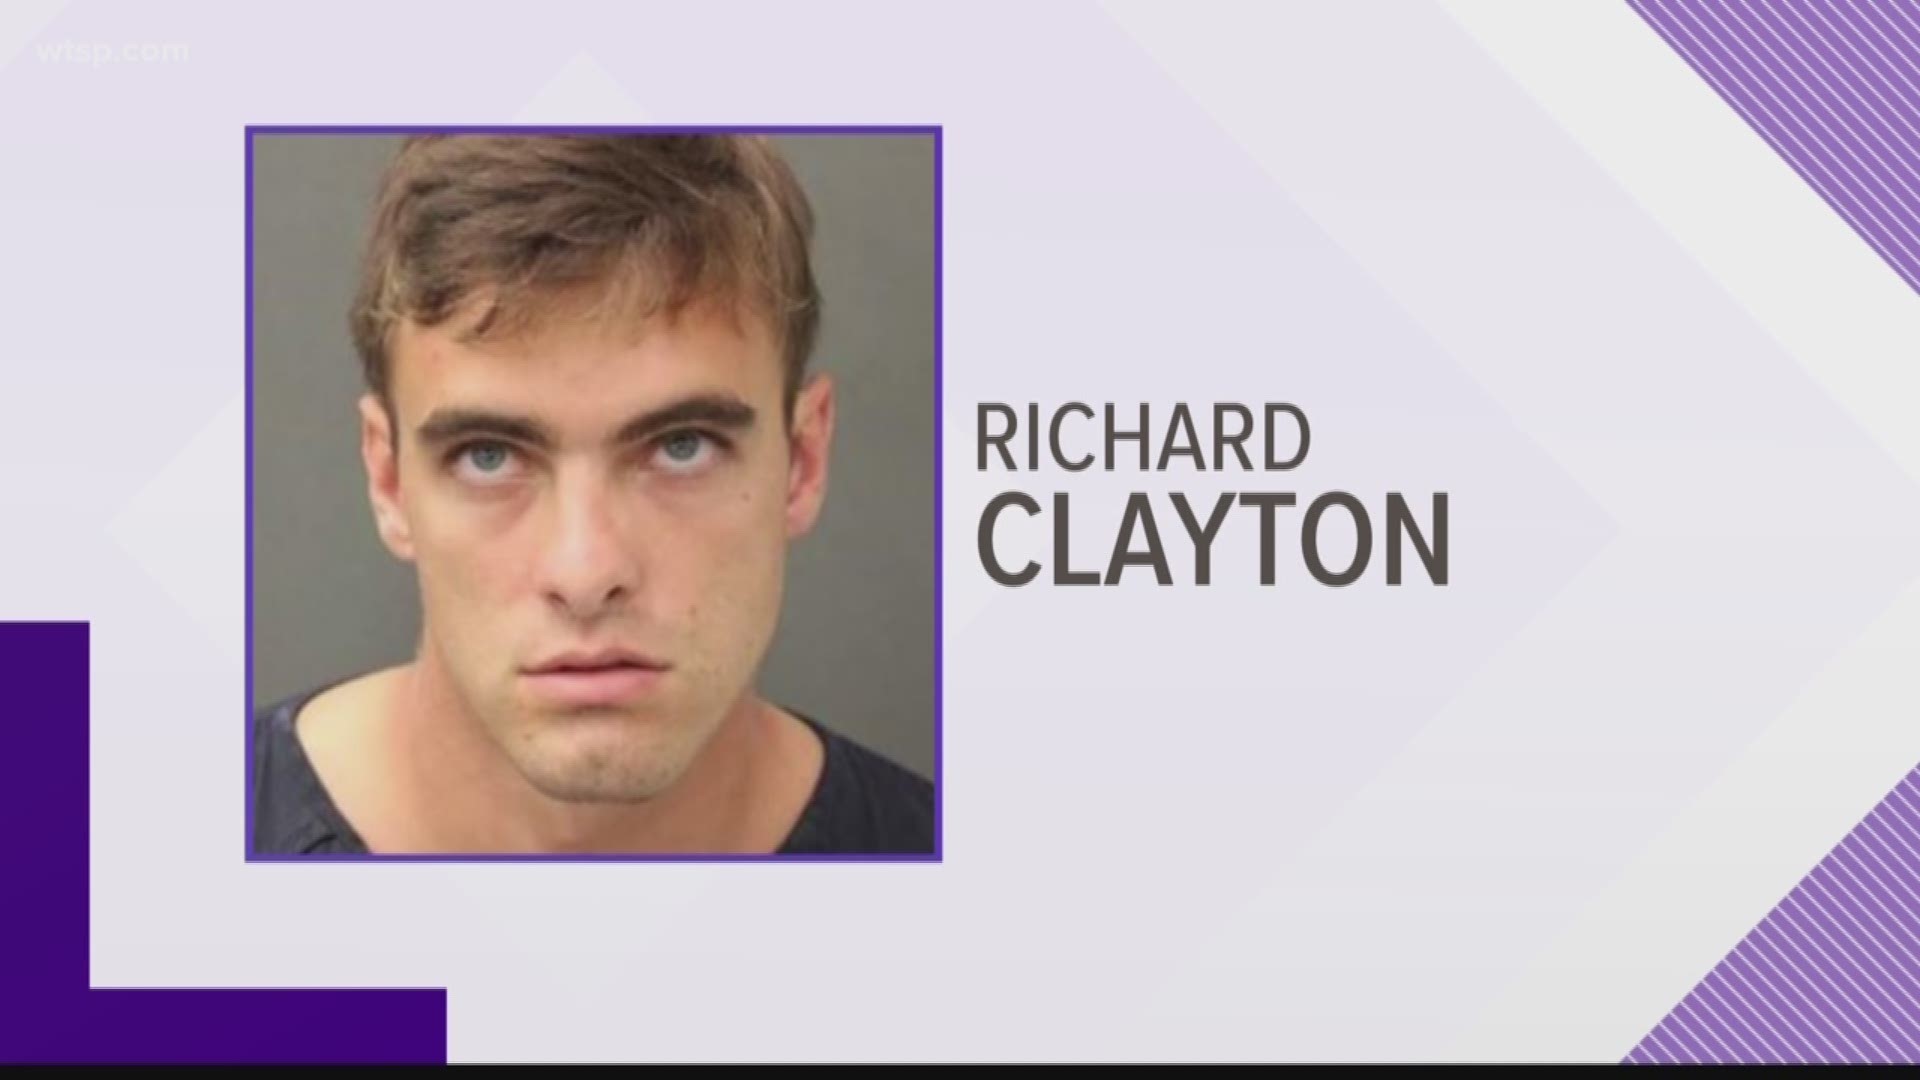 A man accused of making a threat on social media while referencing Walmart has been jailed.

Richard Clayton, 26, was arrested Friday amid an investigation into a threat he allegedly made Aug. 6 on Facebook: "3 more days of probation left then I get my AR-15 back.  Don’t go to Walmart next week," according to a Florida Department of Law Enforcement news release.